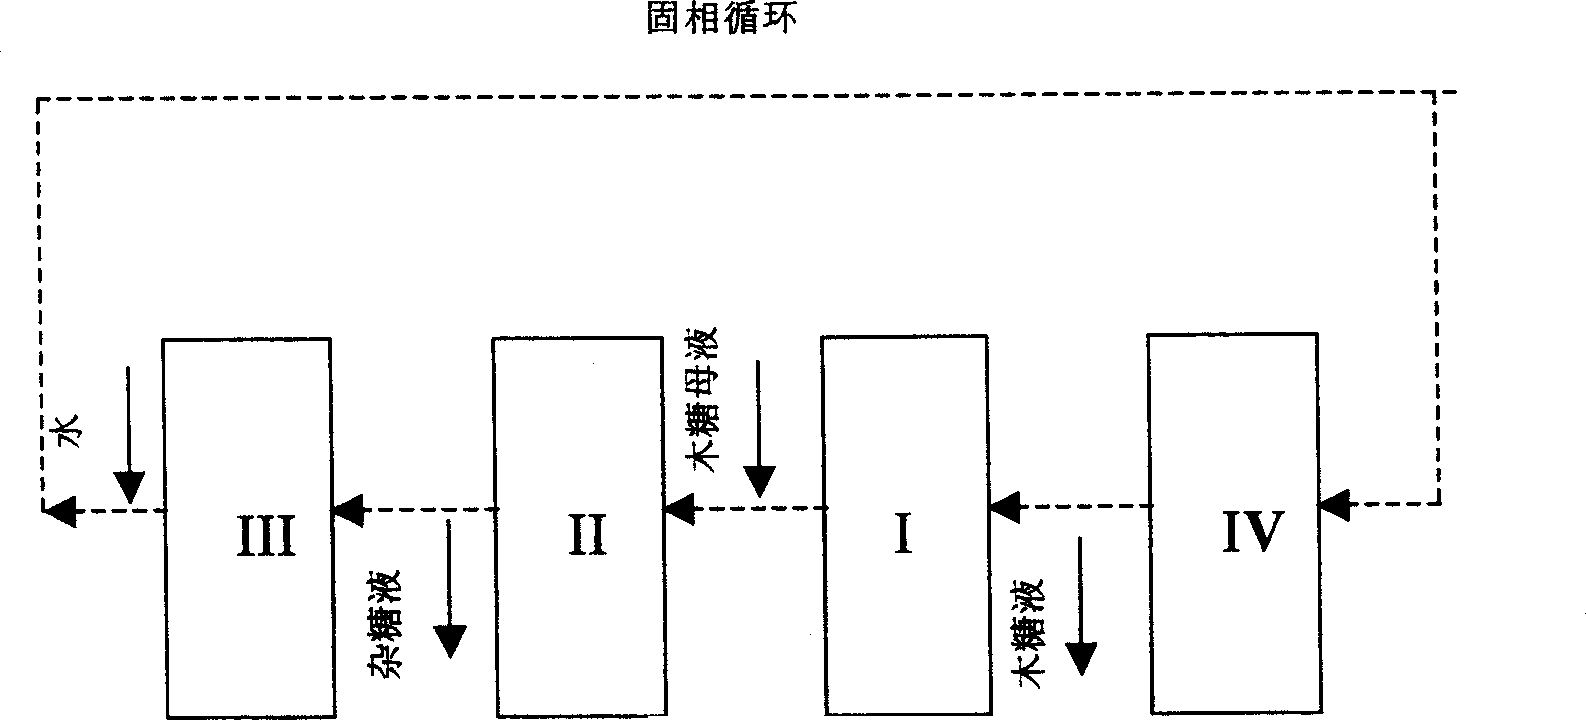 Process for extracting xylose and xylitol from a xylose mother liquor or a xylose digest